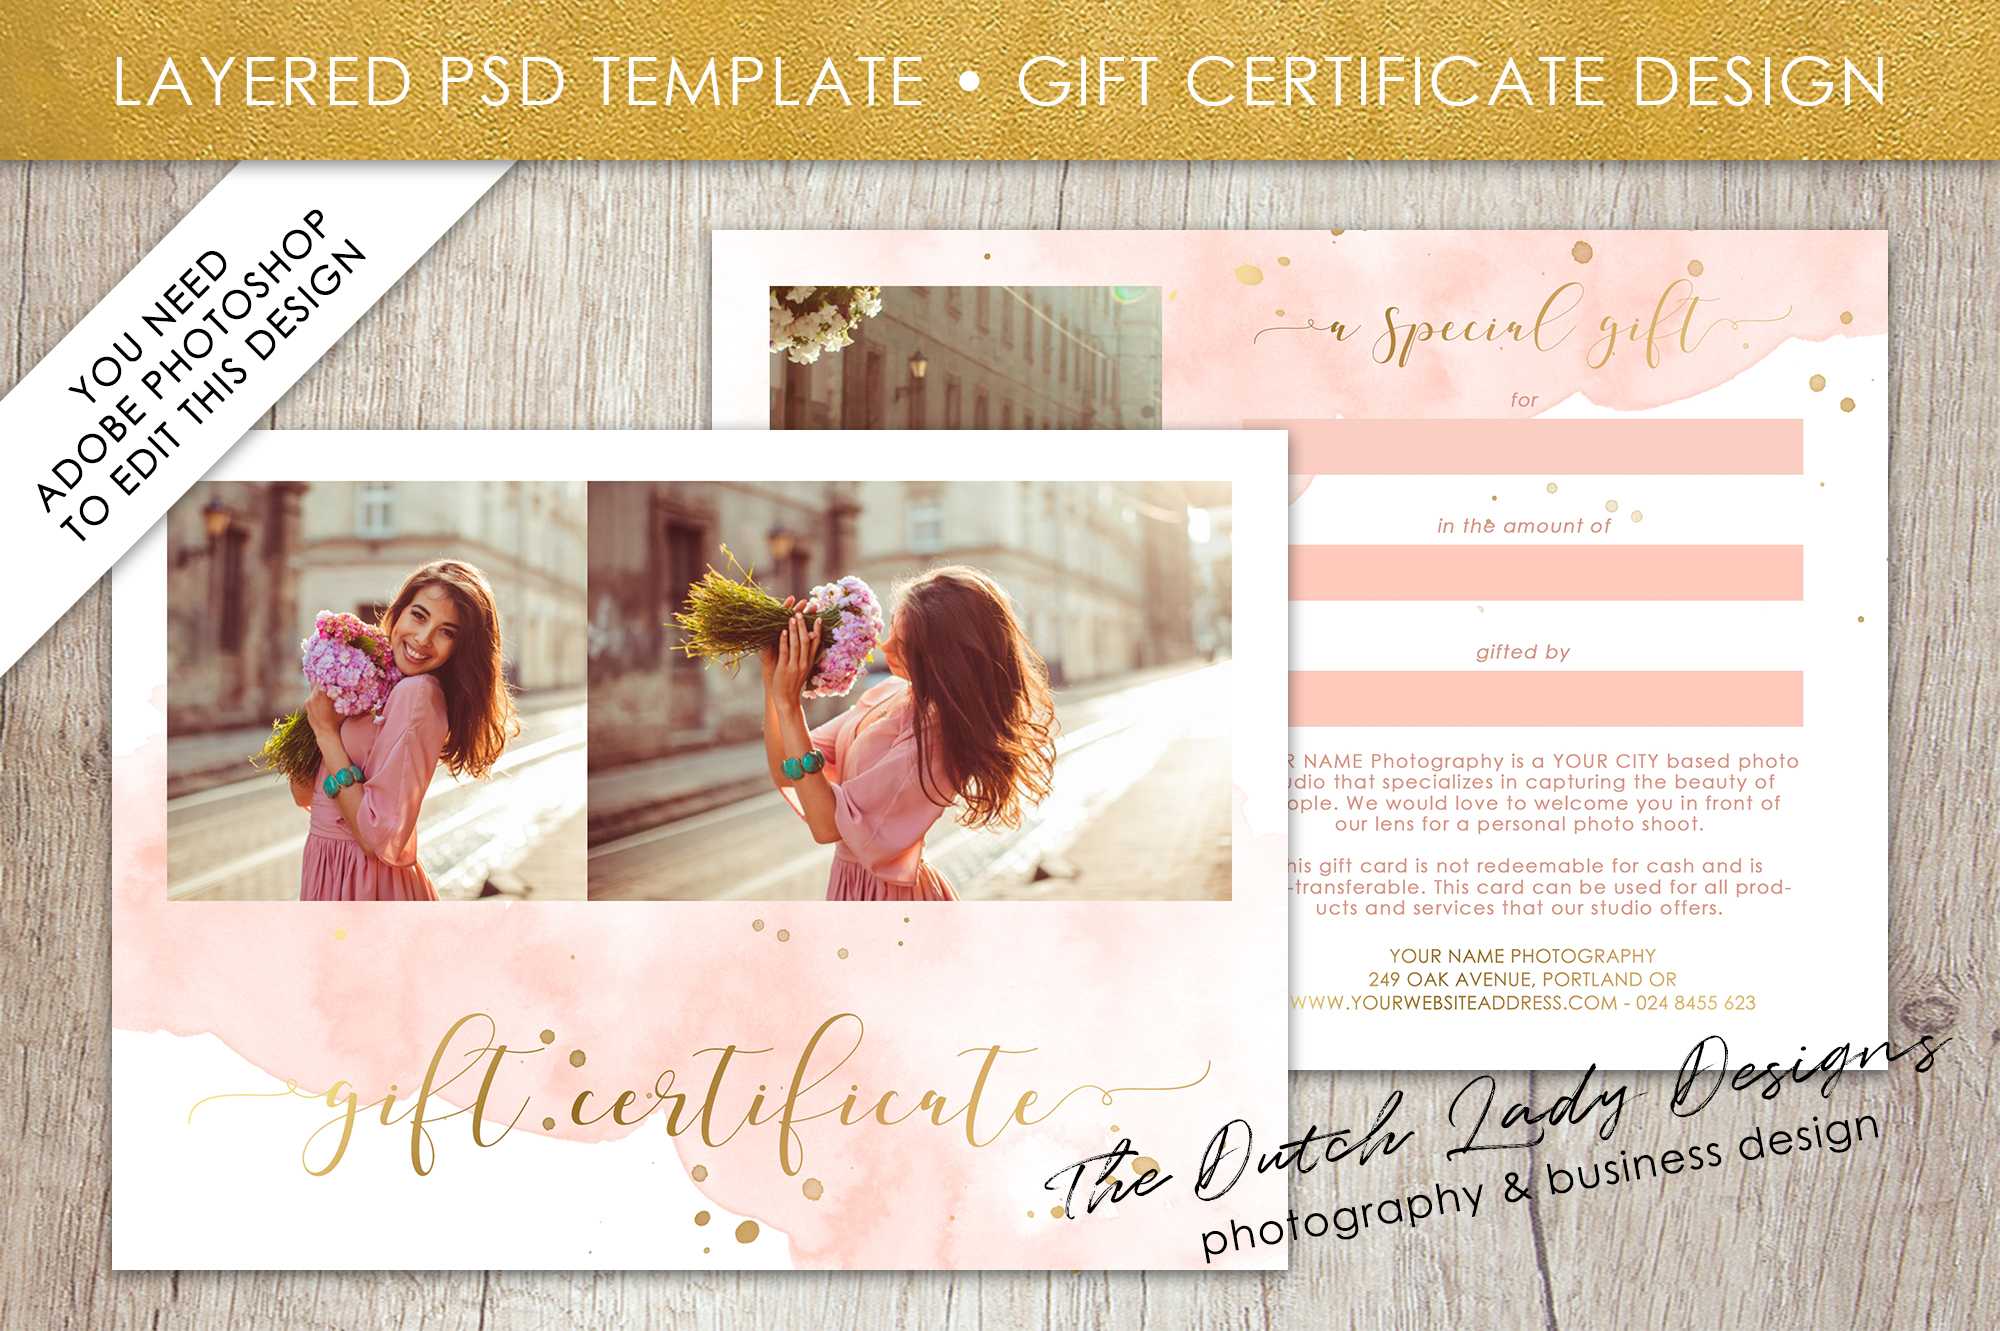 012 Minimal Photography Gift Certificate Template Gc009 Throughout Gift Certificate Template Photoshop